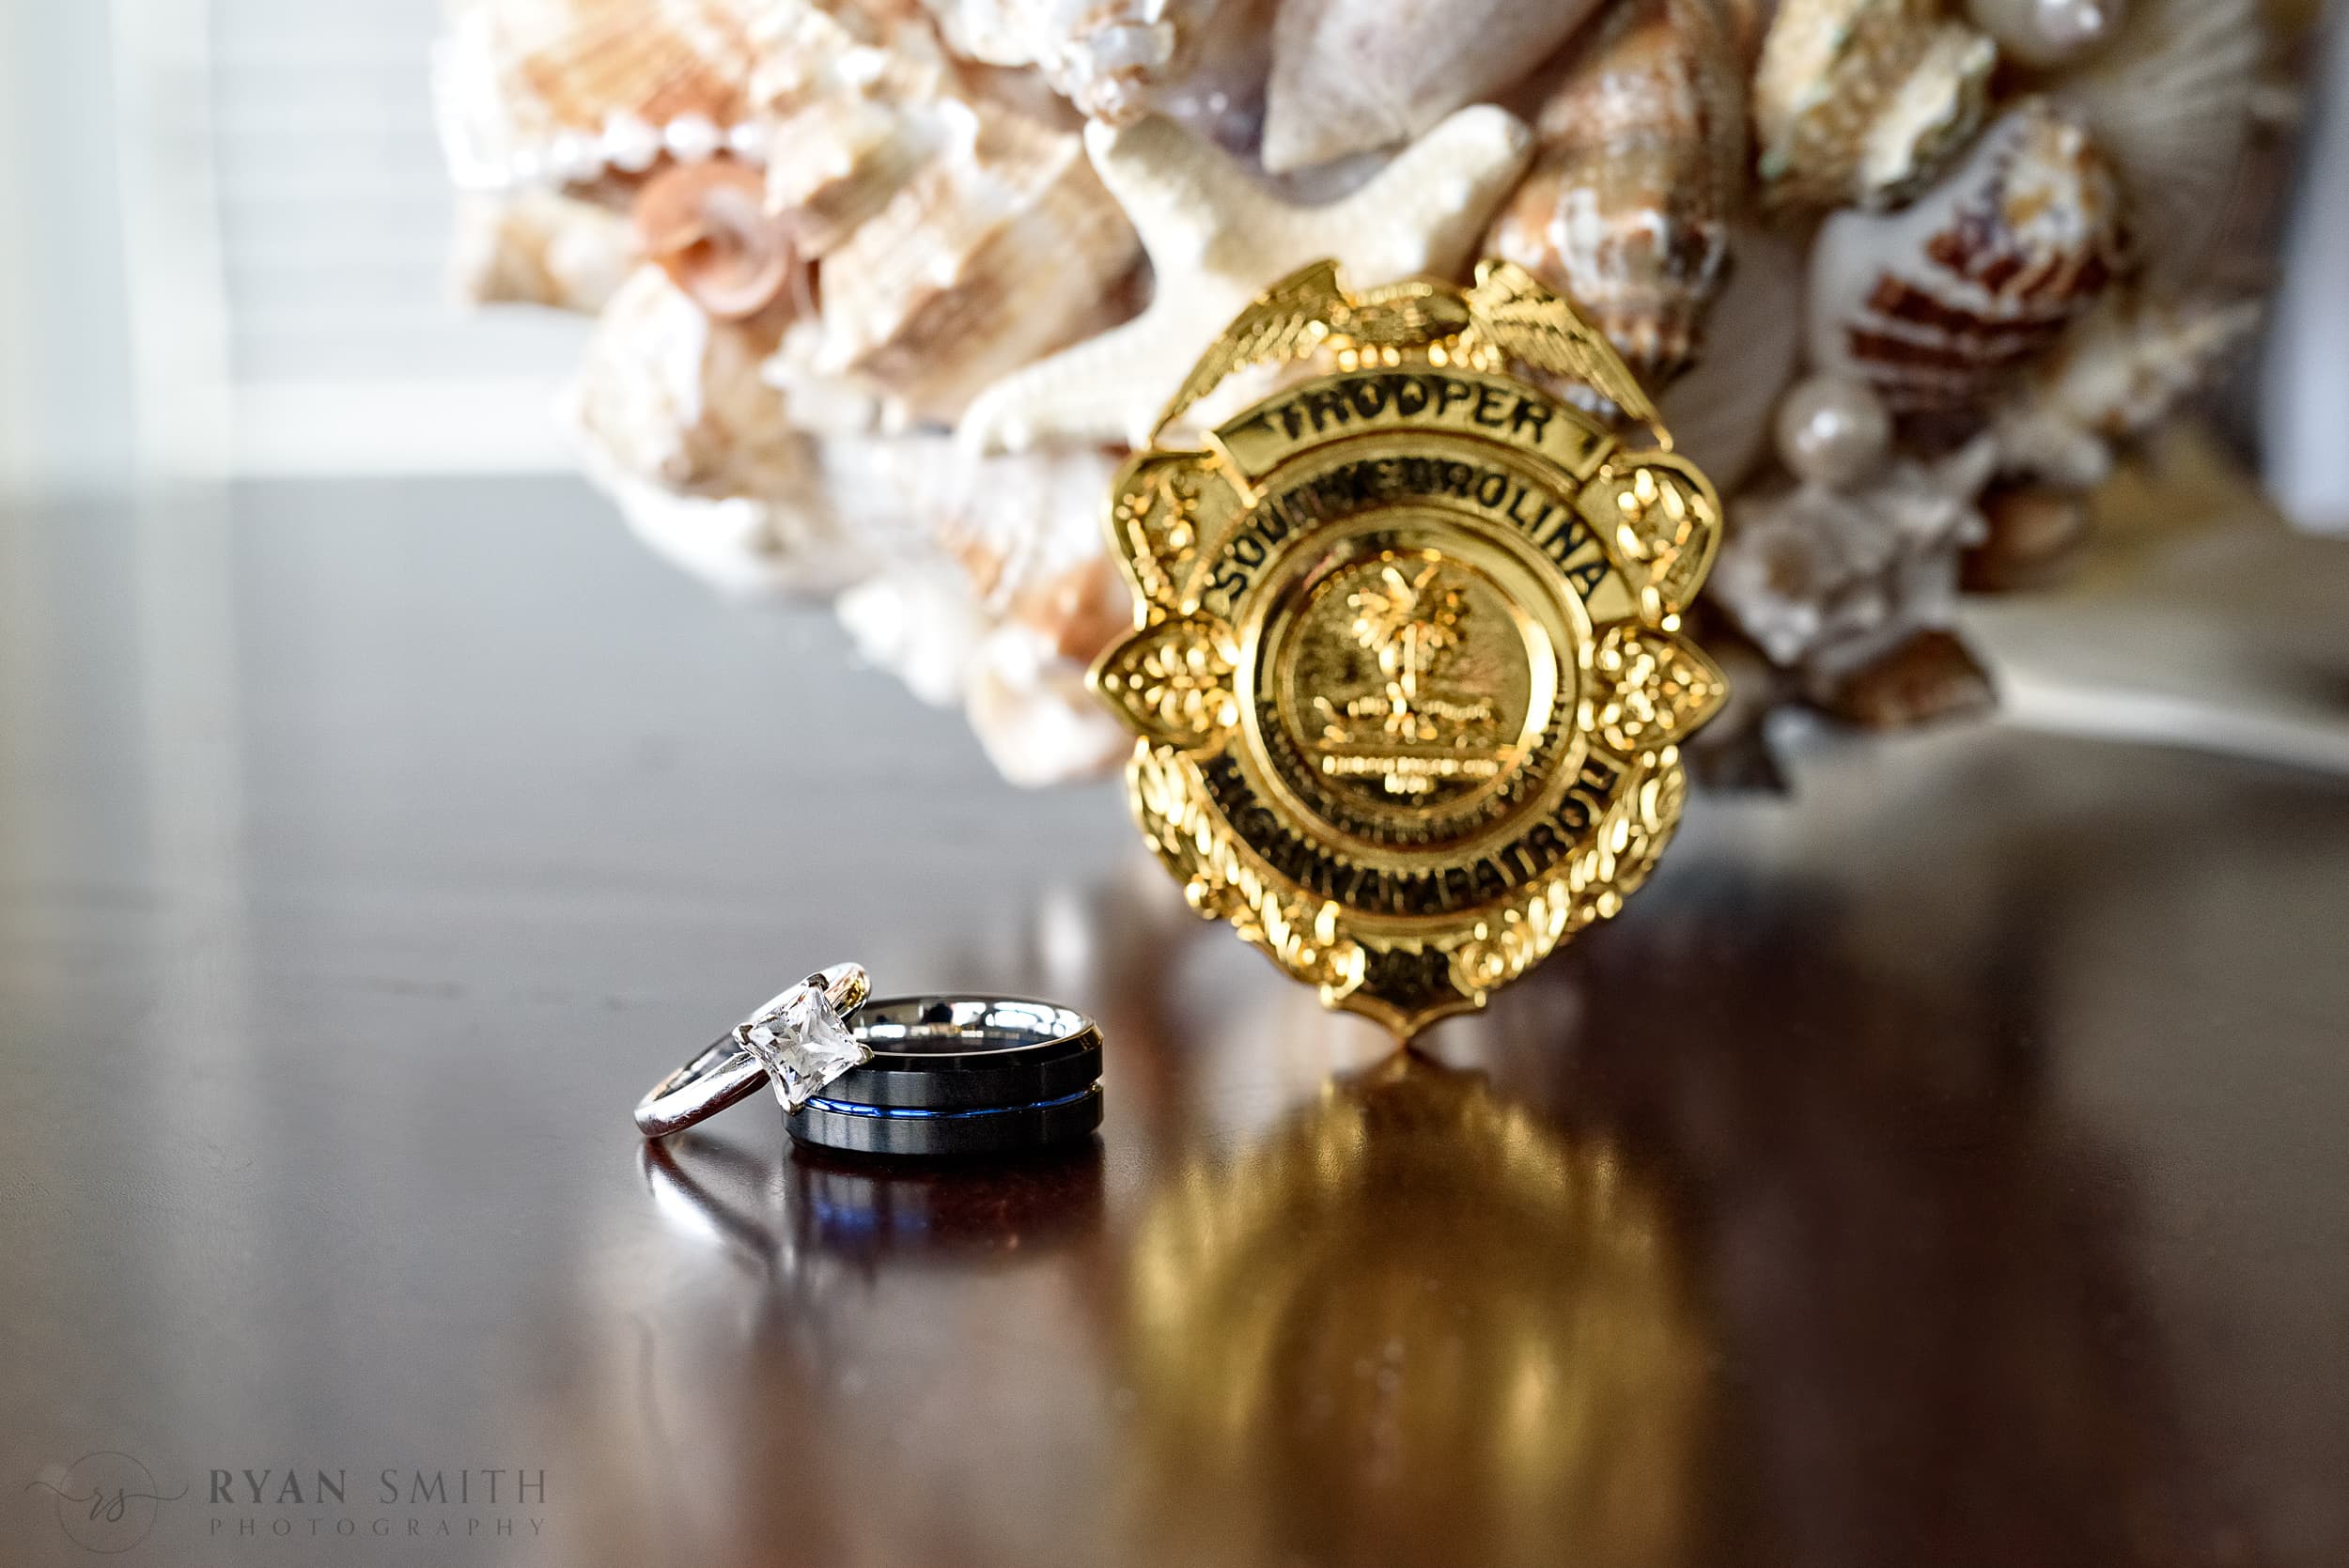 The bride wanted her husband's state trooper badge in the ring shots -